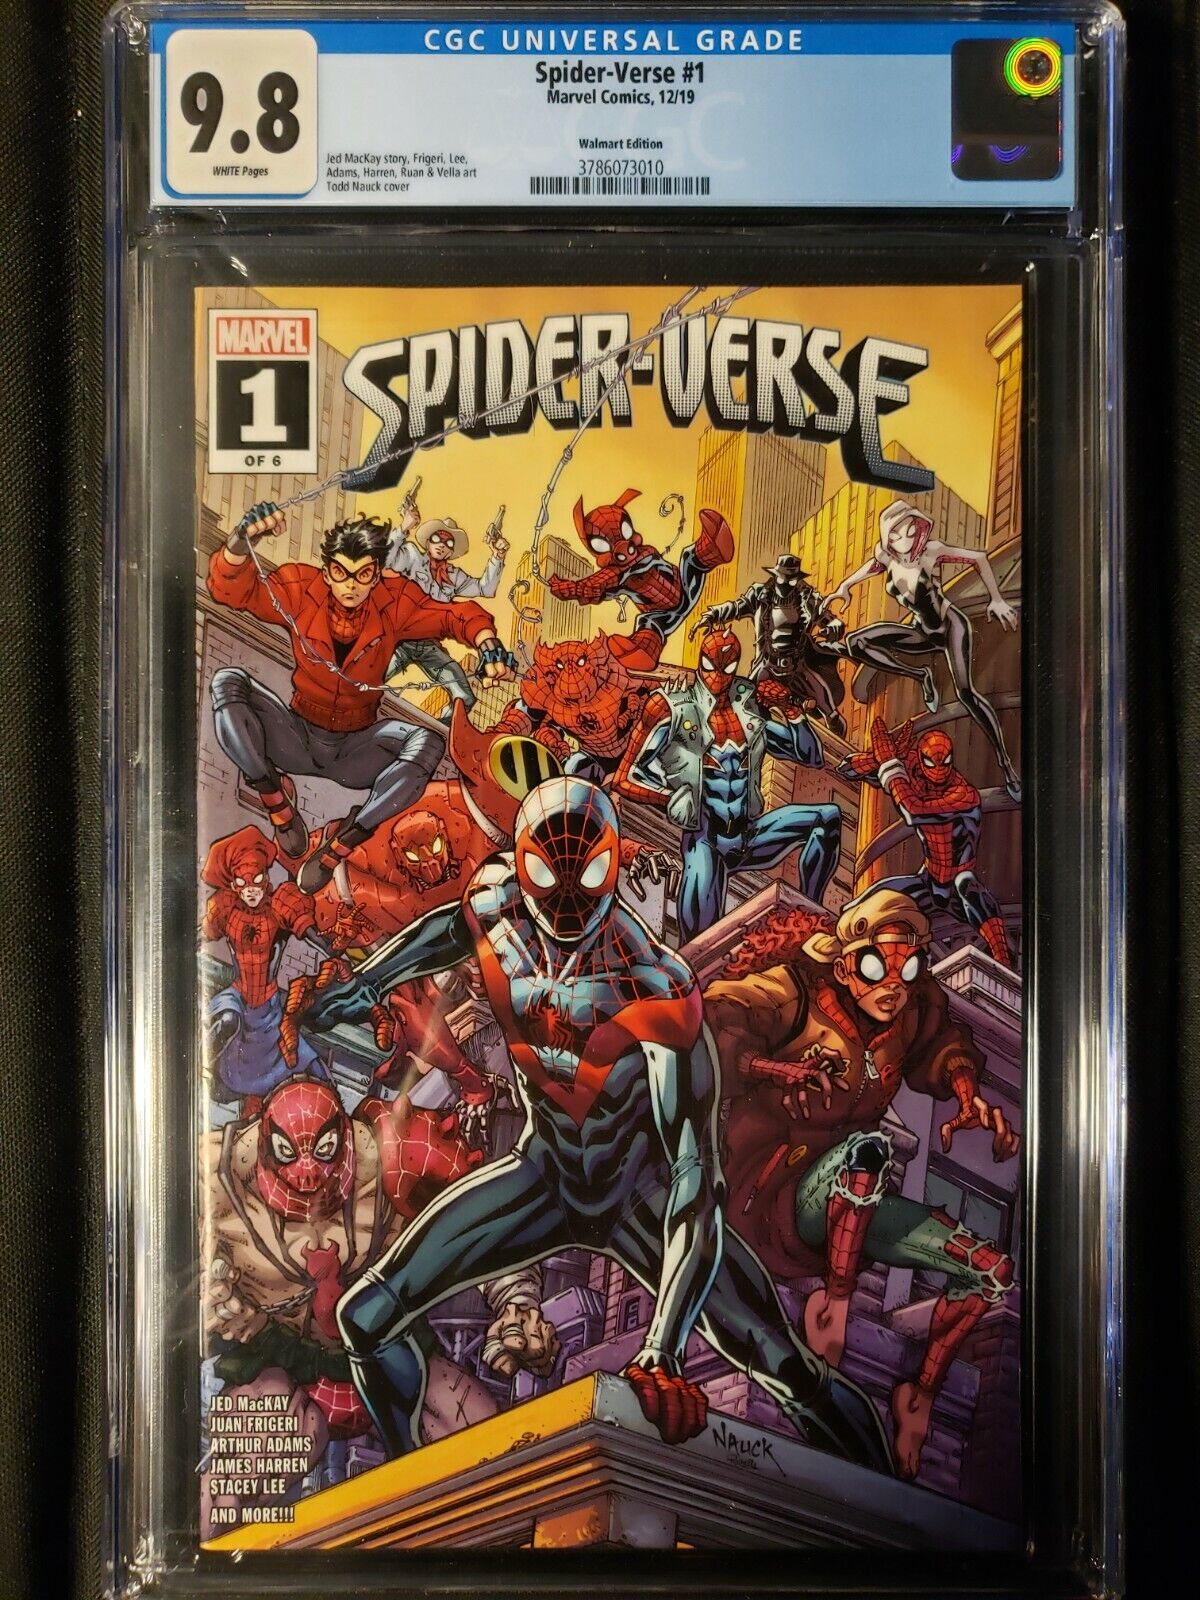 Spider-Verse #1 (2019) 9.8 CGC, White Pages, Walmart edition, Todd Nauck cover